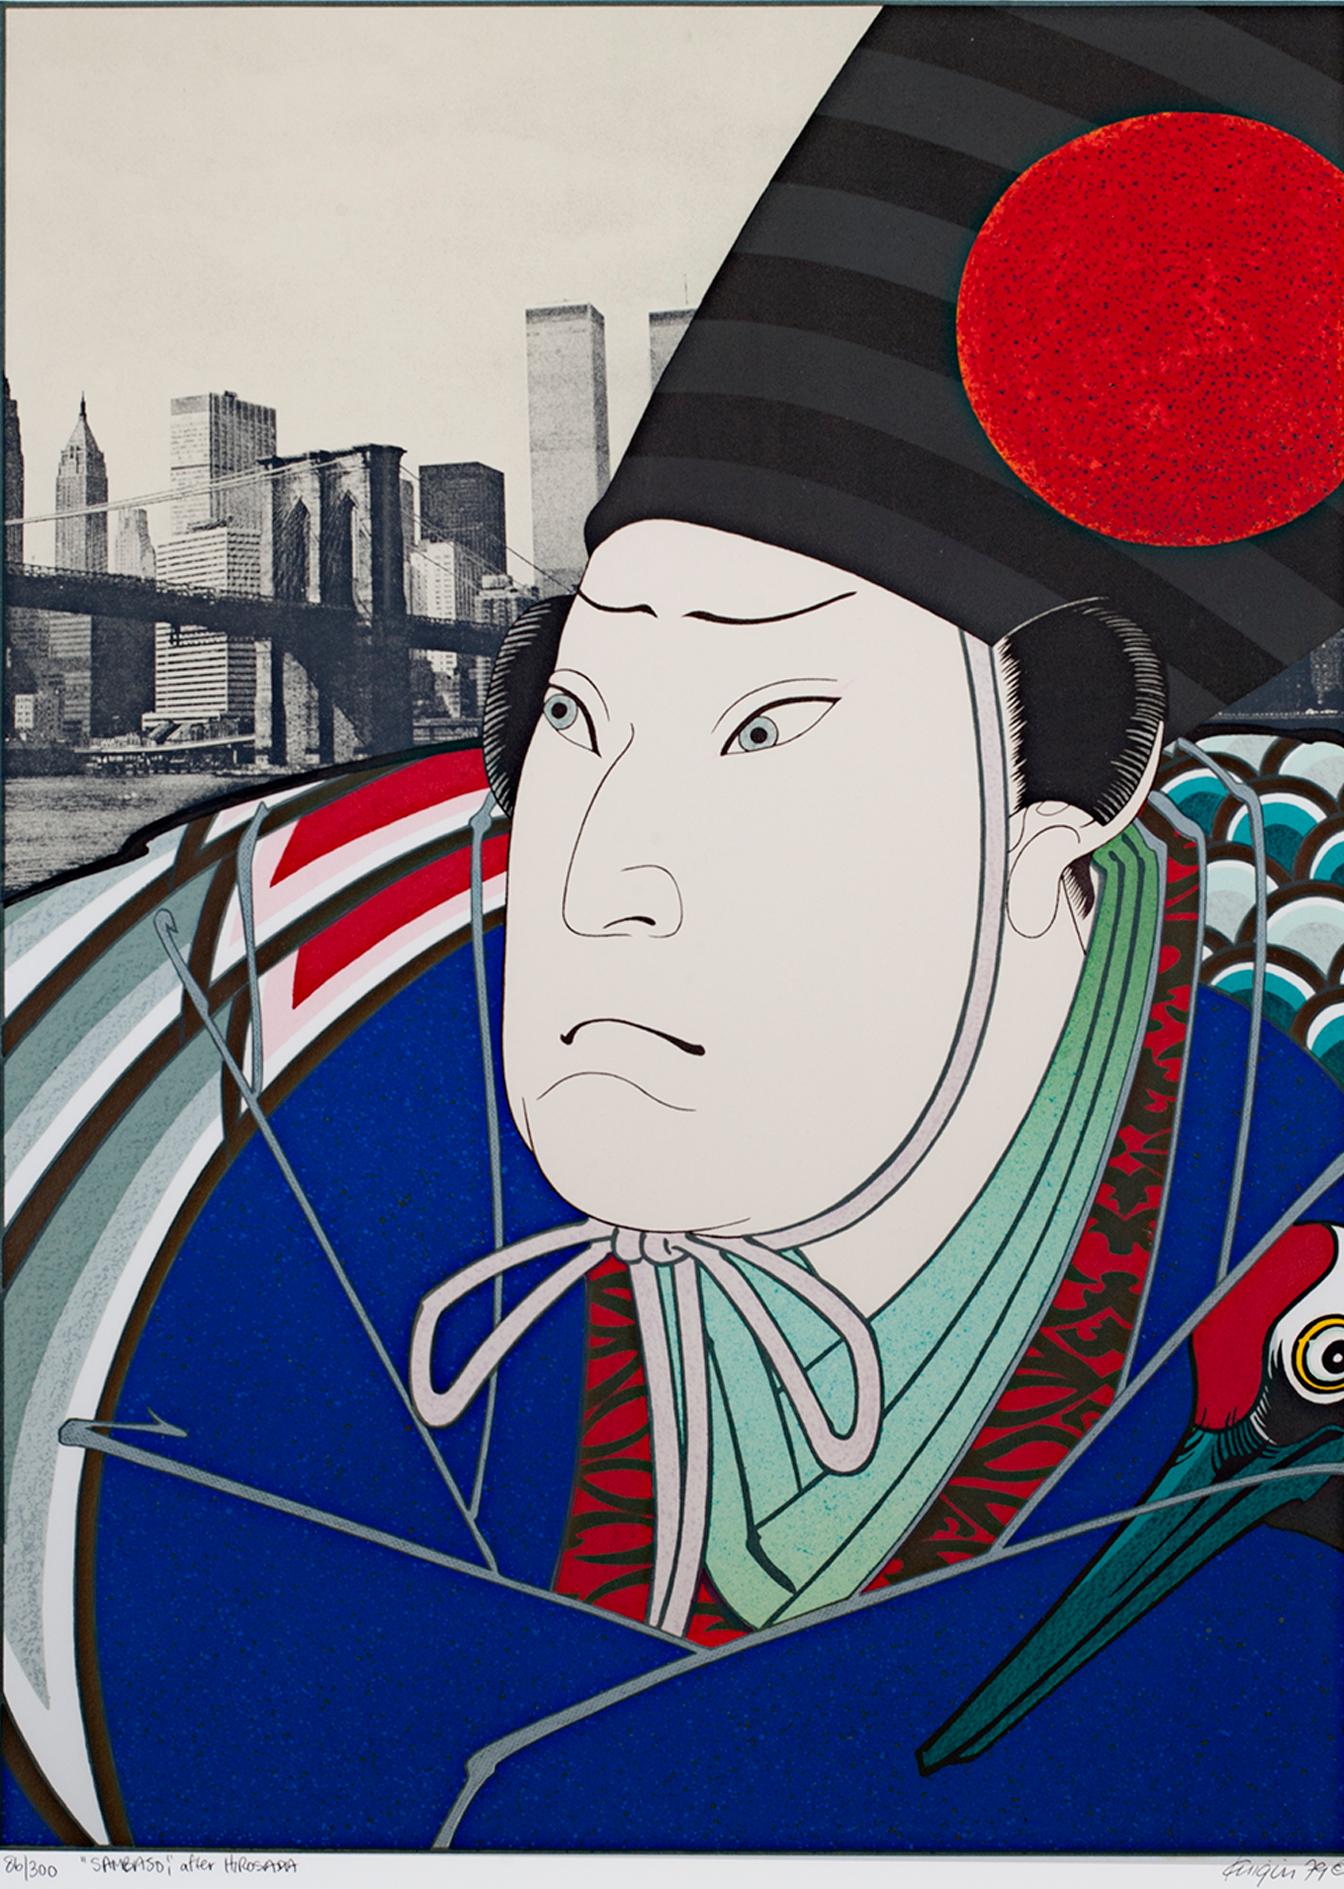 "Sambaso After Hirosada" is an original color lithograph by Michael Knigin from his Osaka series. This lithograph features a portrait of a traditional Japanese man in front of the New York City skyline. The artist signed the piece lower right and